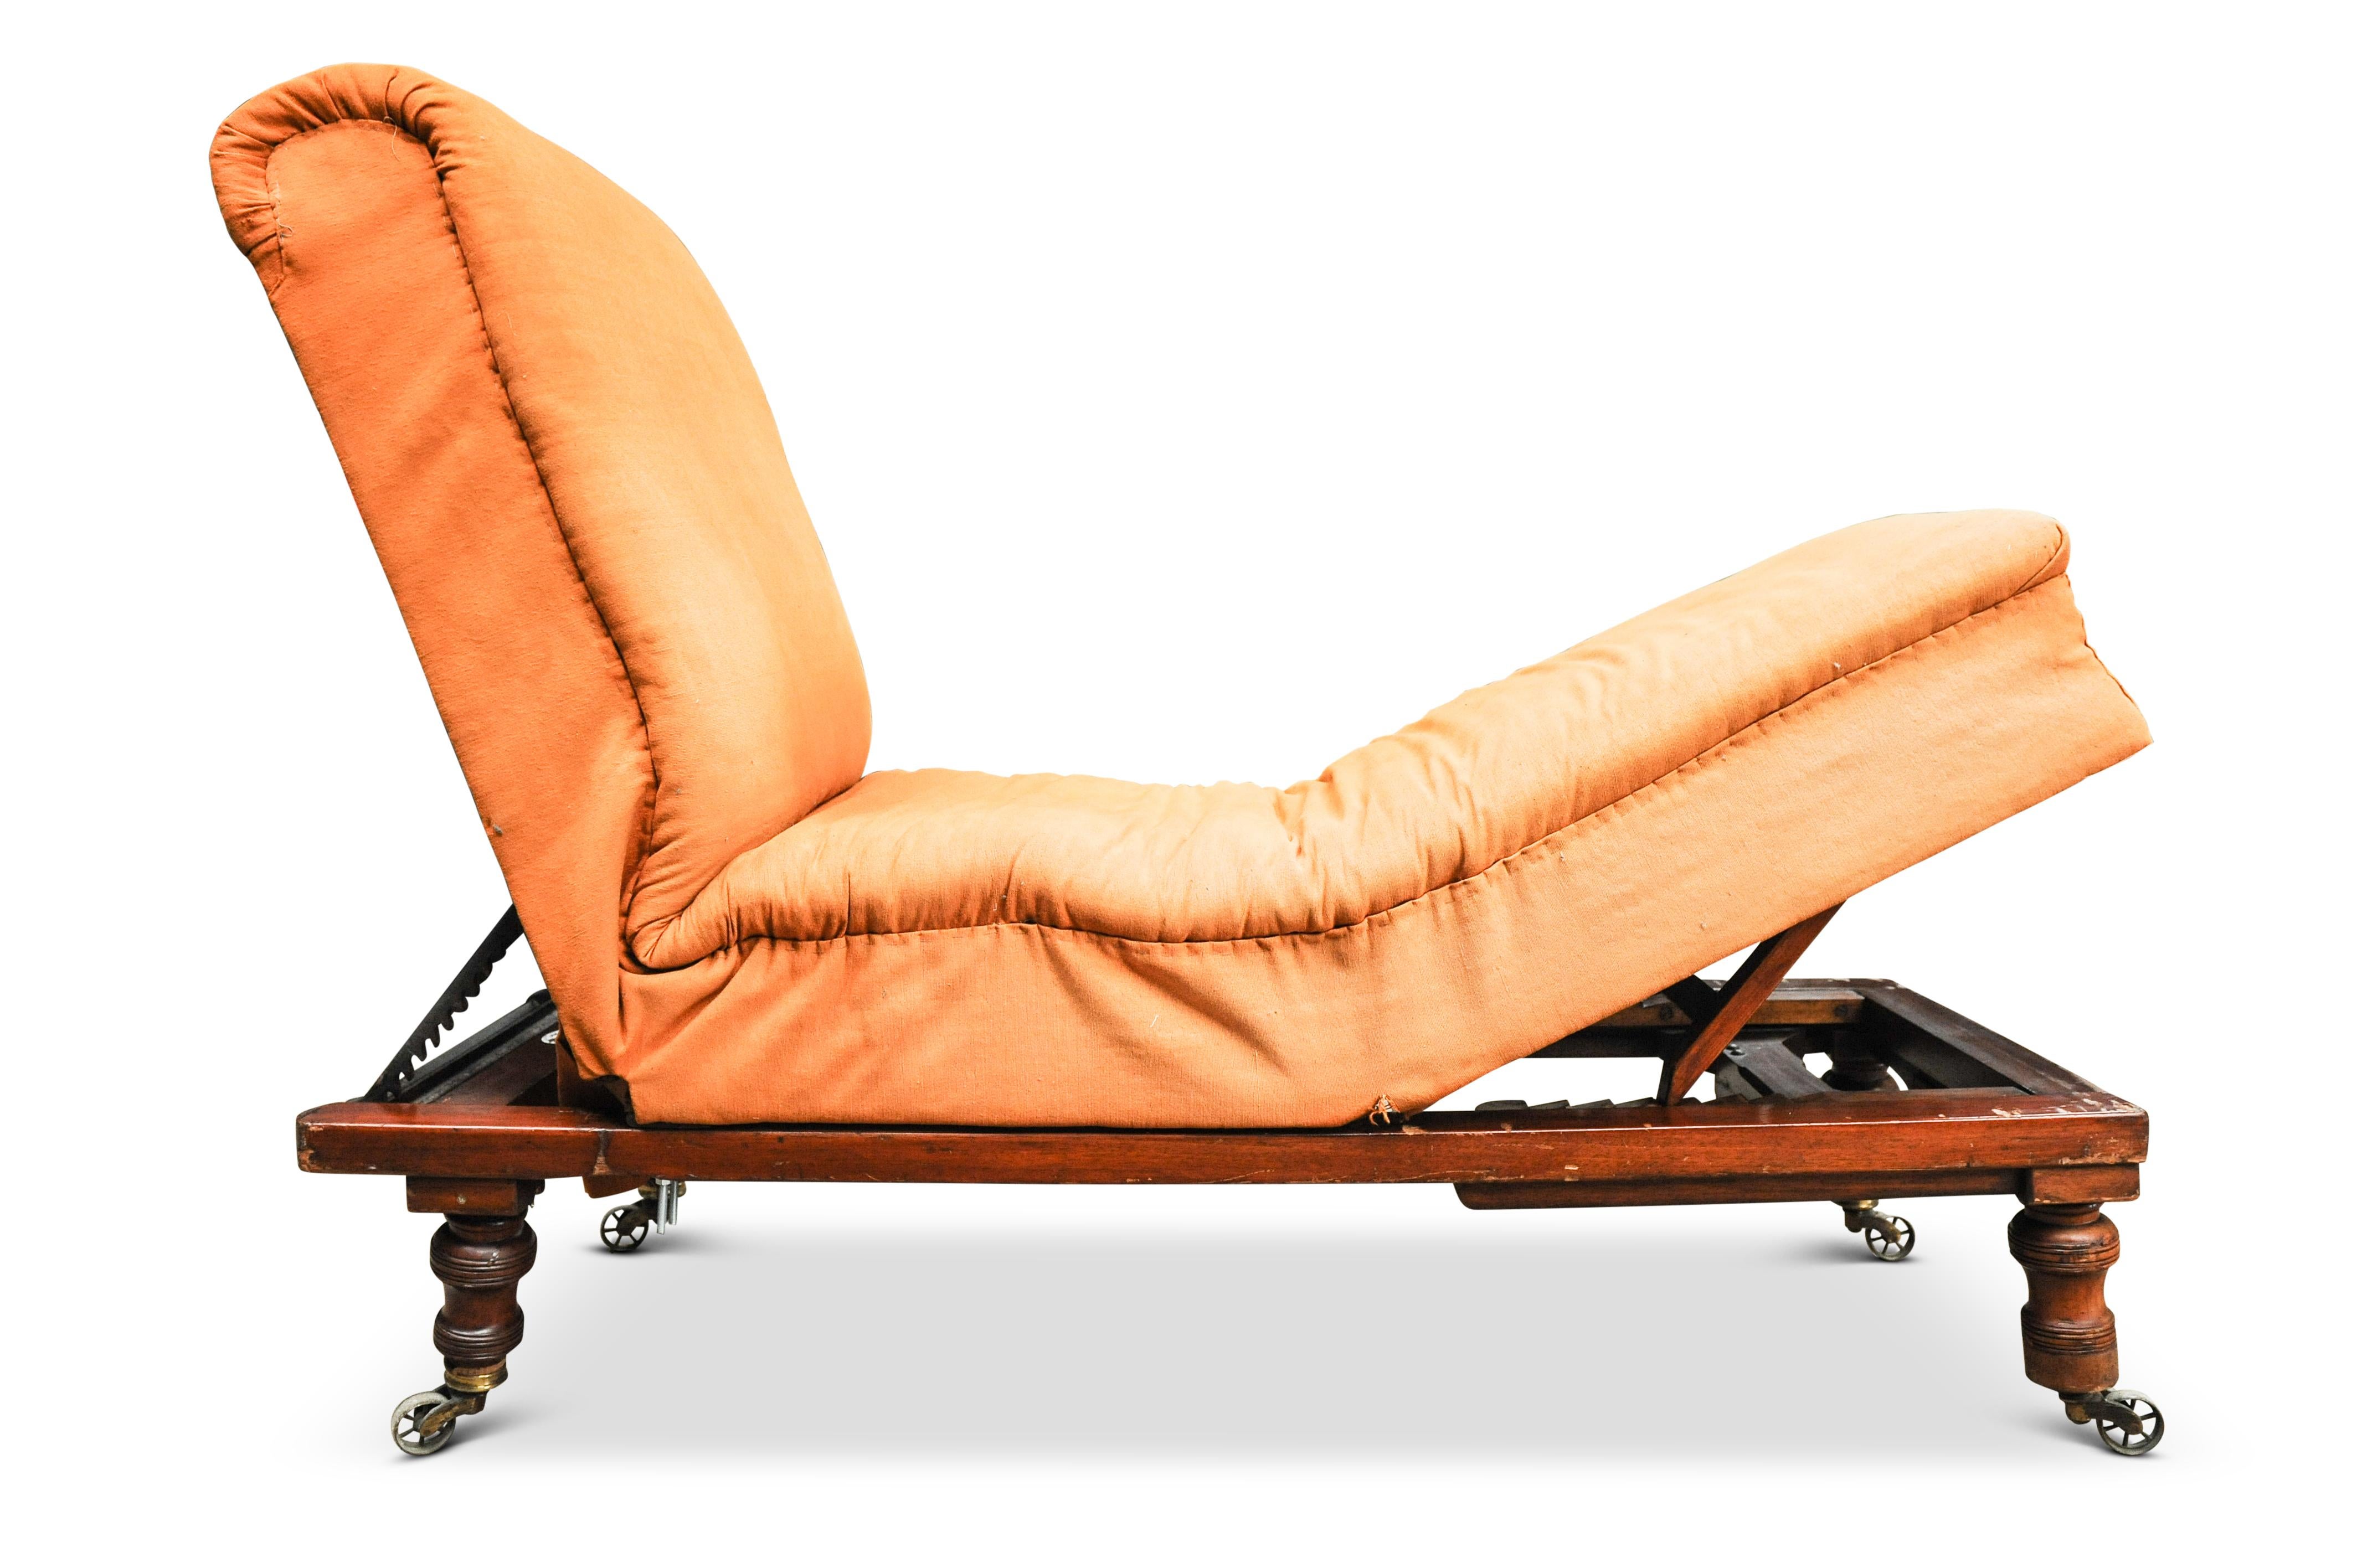 Late 19th Century Adjustable Chaise Lounge In Orange Fabric Known As The 